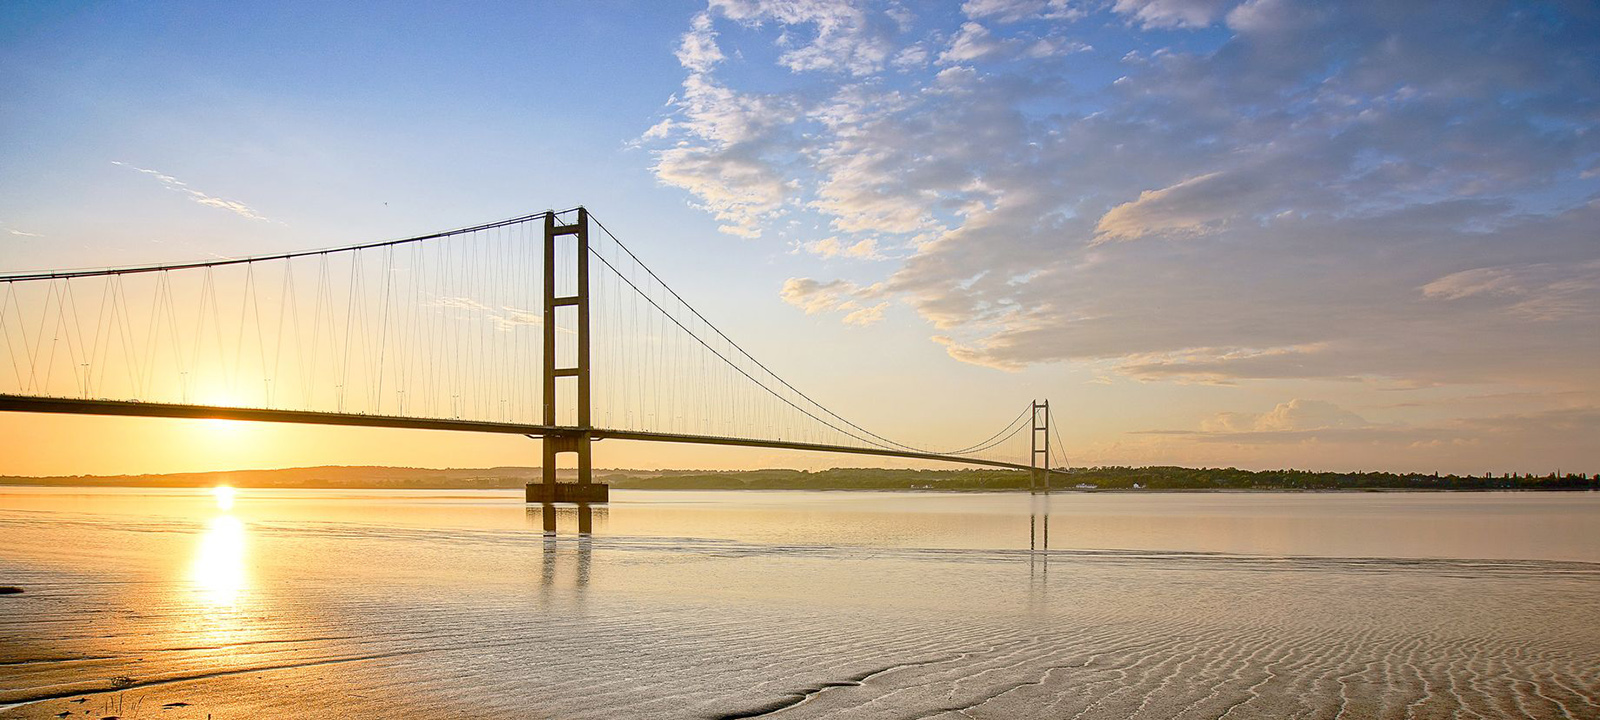 The Humber Bridge is a local landmark to Brewer Wallace Solicitors in East Yorkshire